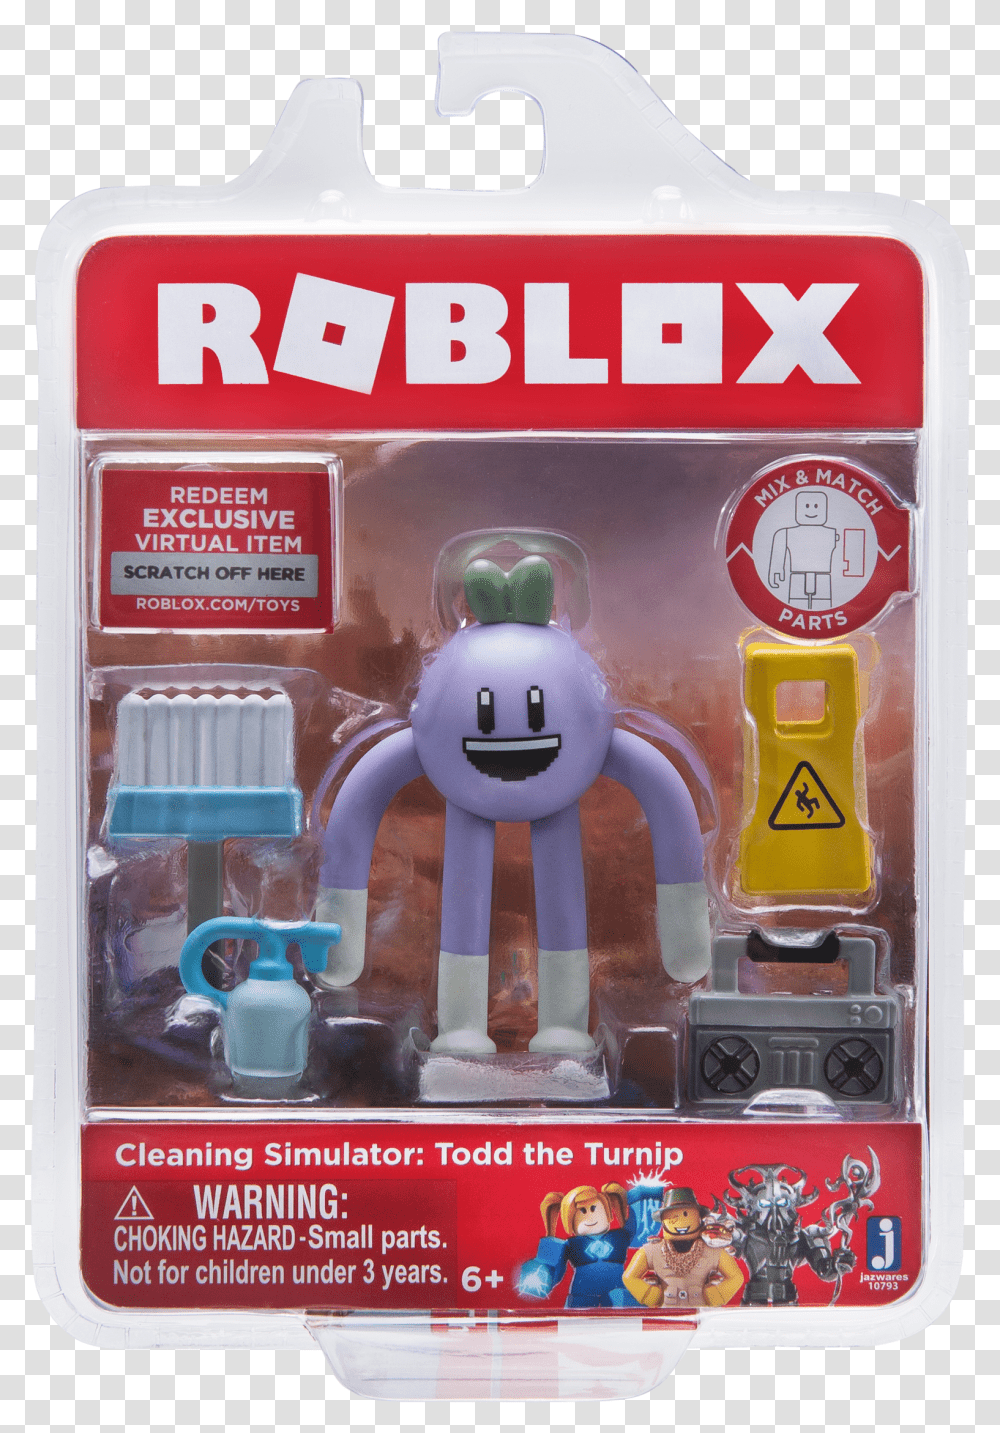 Roblox Template Roblox Todd The Turnip Toy 4182864 Roblox Flame Guard General Transparent Png